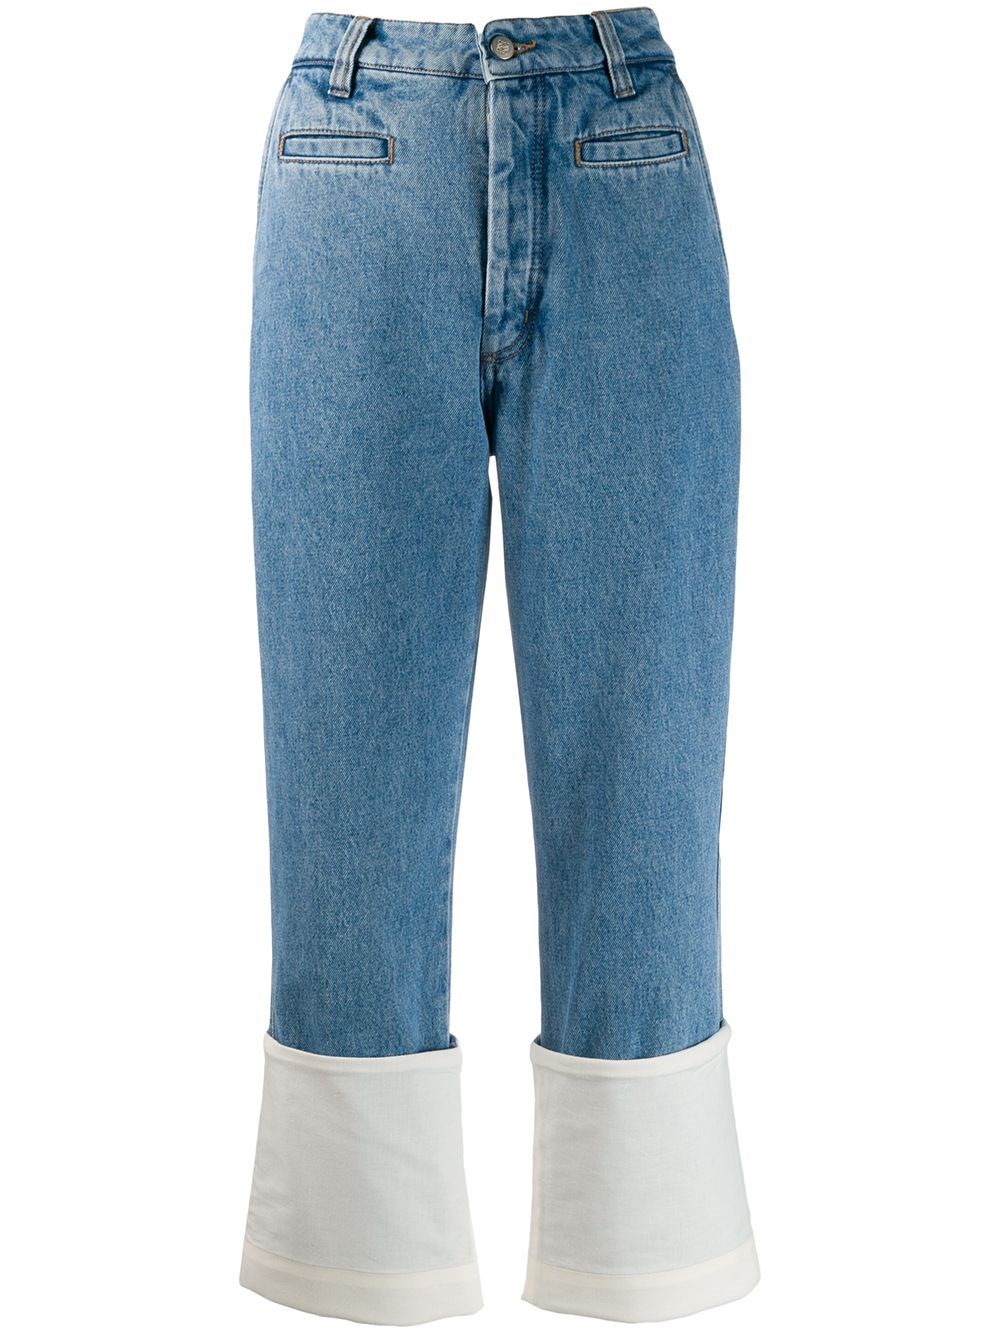 loewe FISHERMAN JEANS available on 